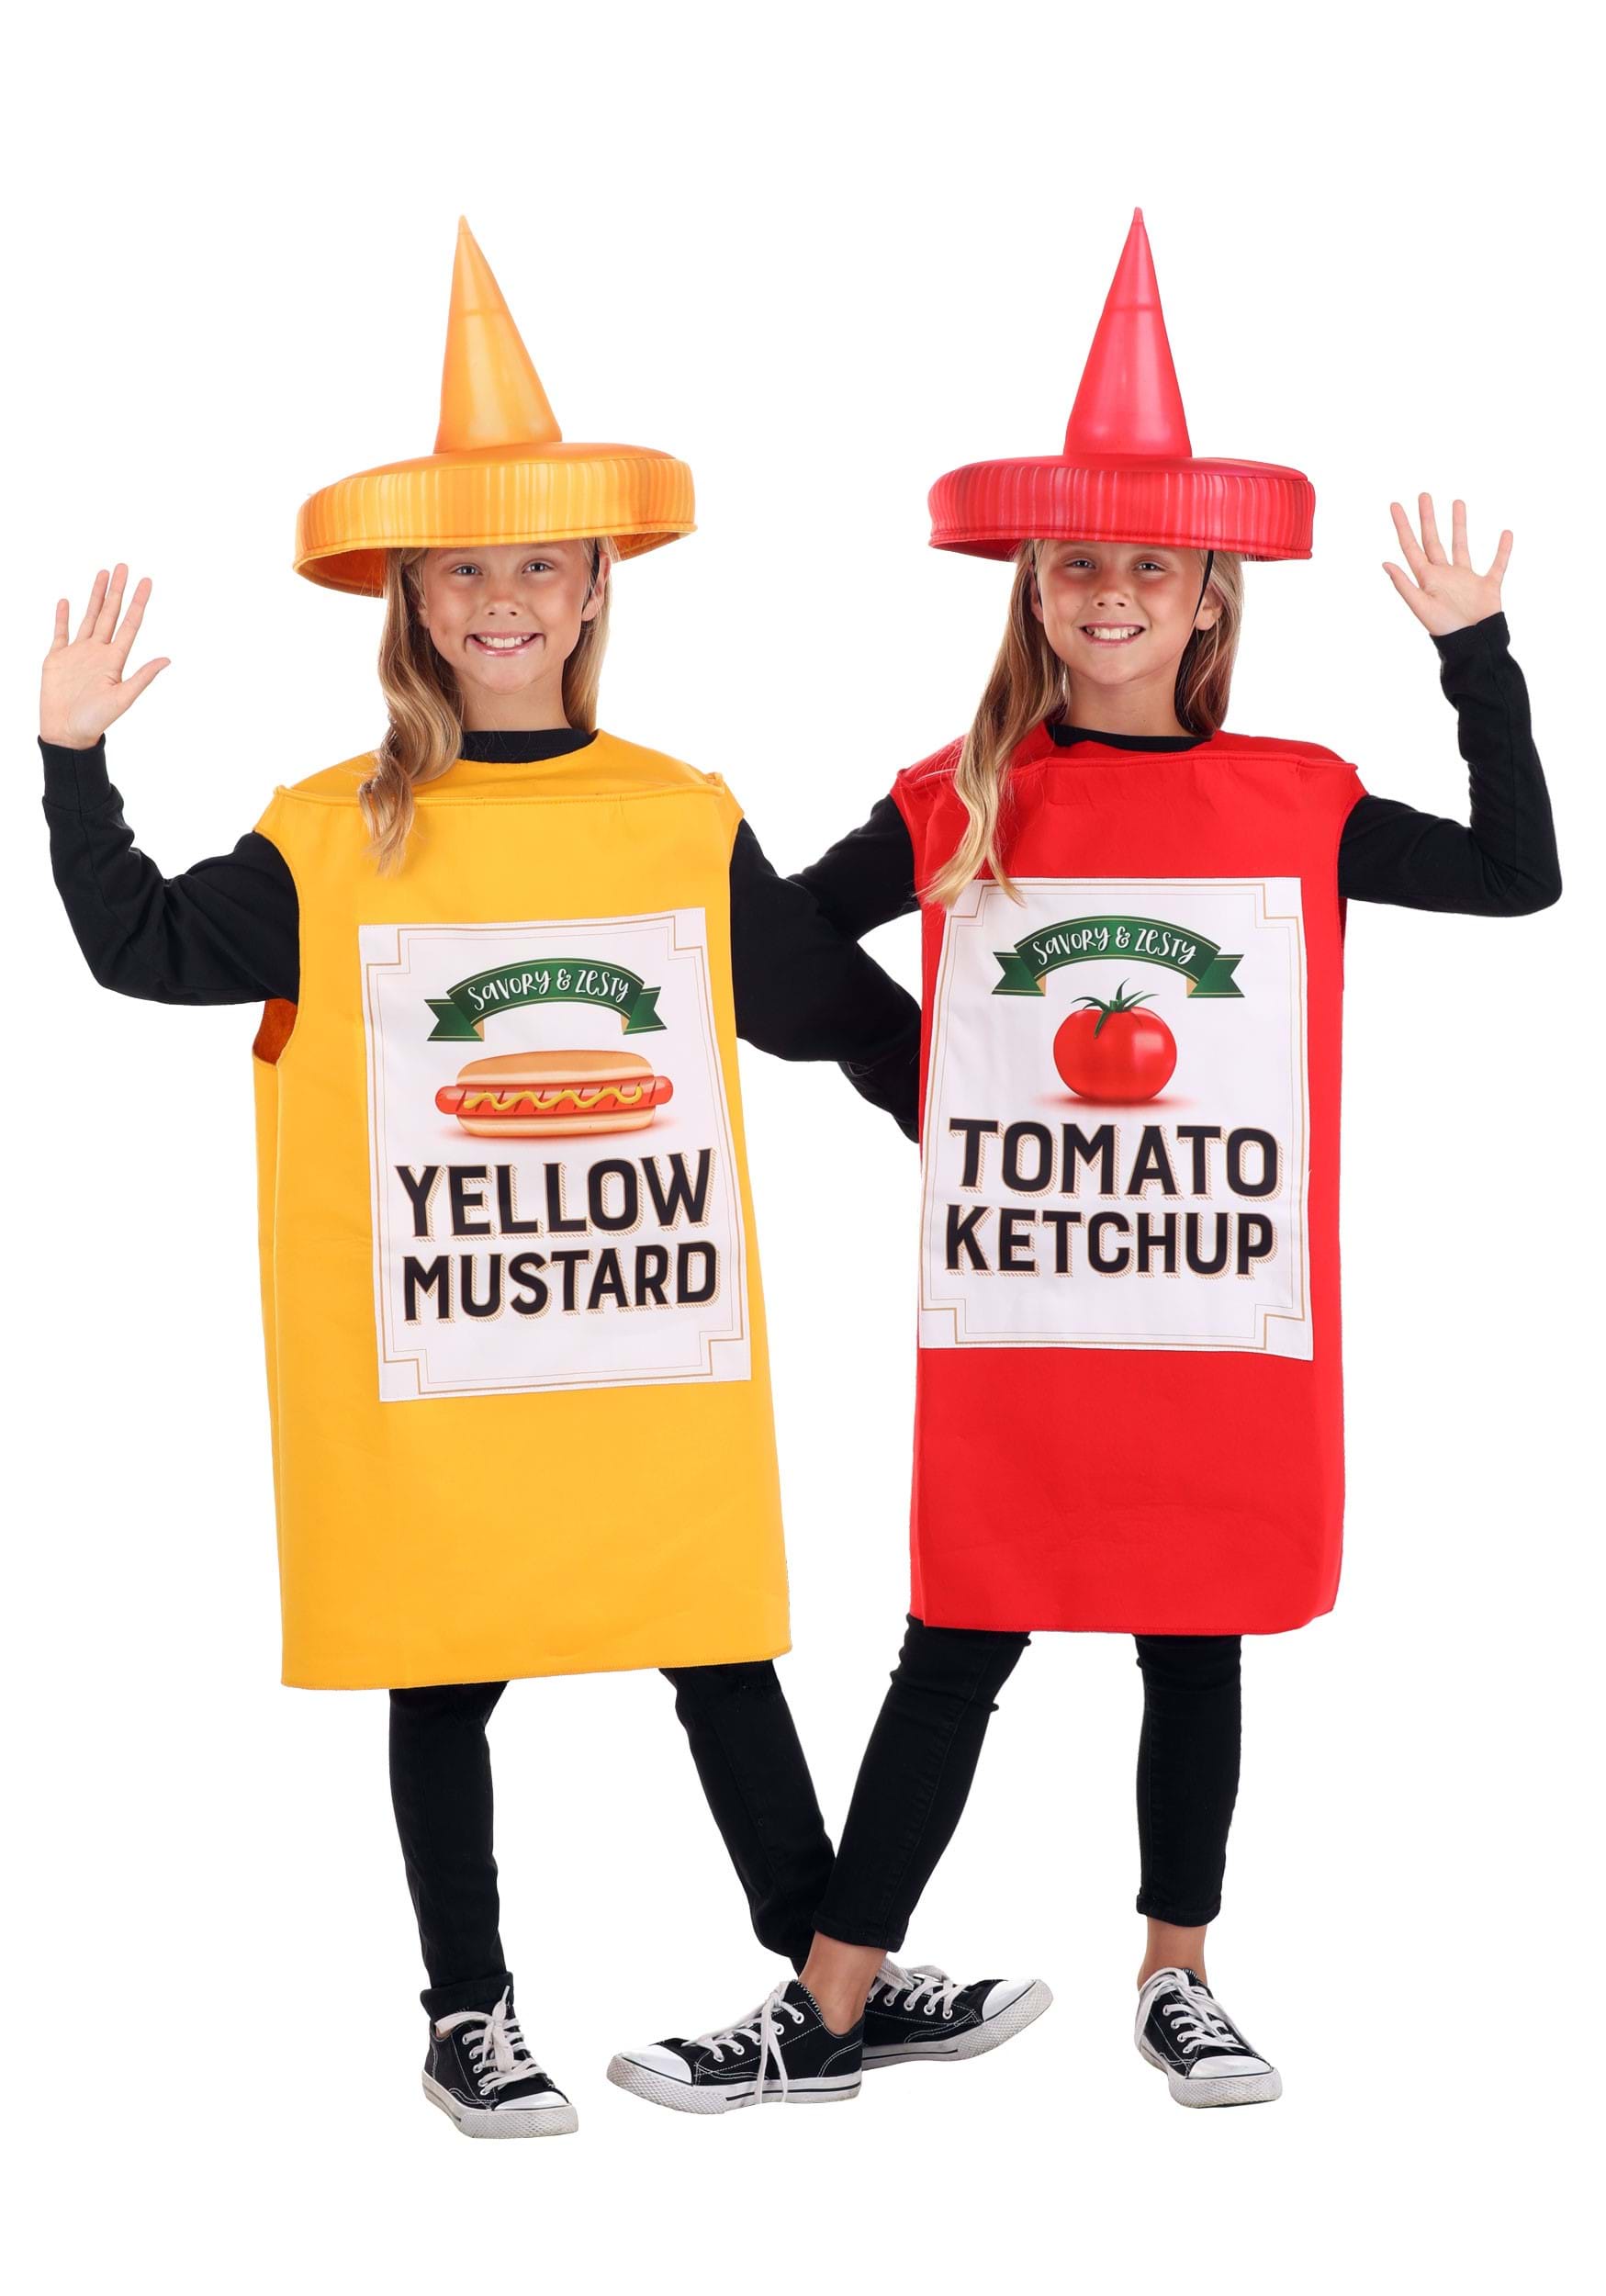 Kid's Red Ketchup Bottle Costume